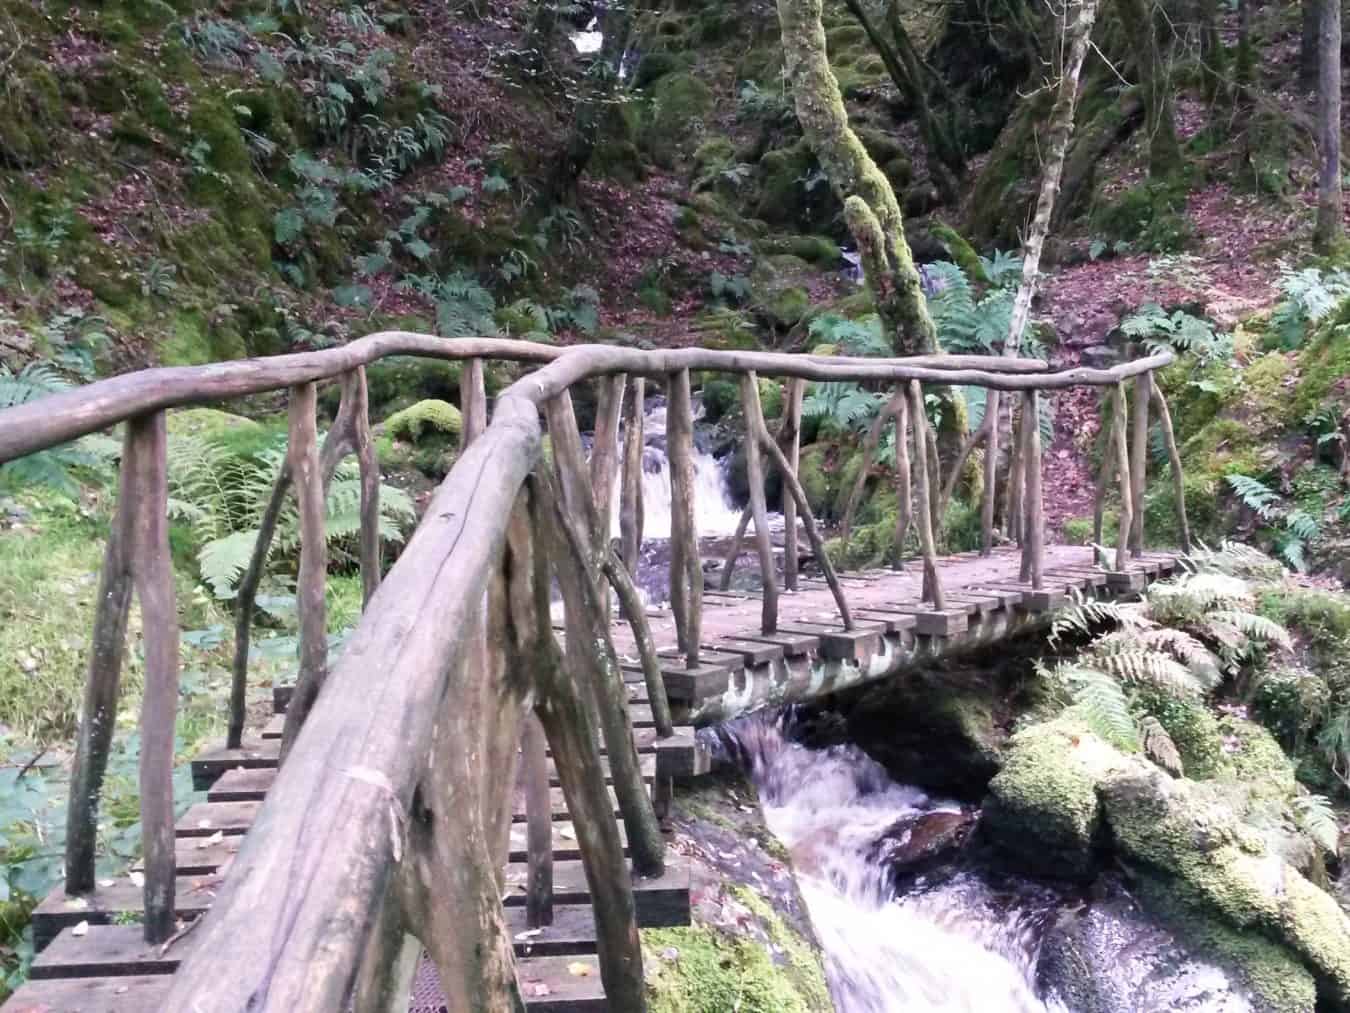 A rustic bridge over the Ystwyth in the Hafod Estate.